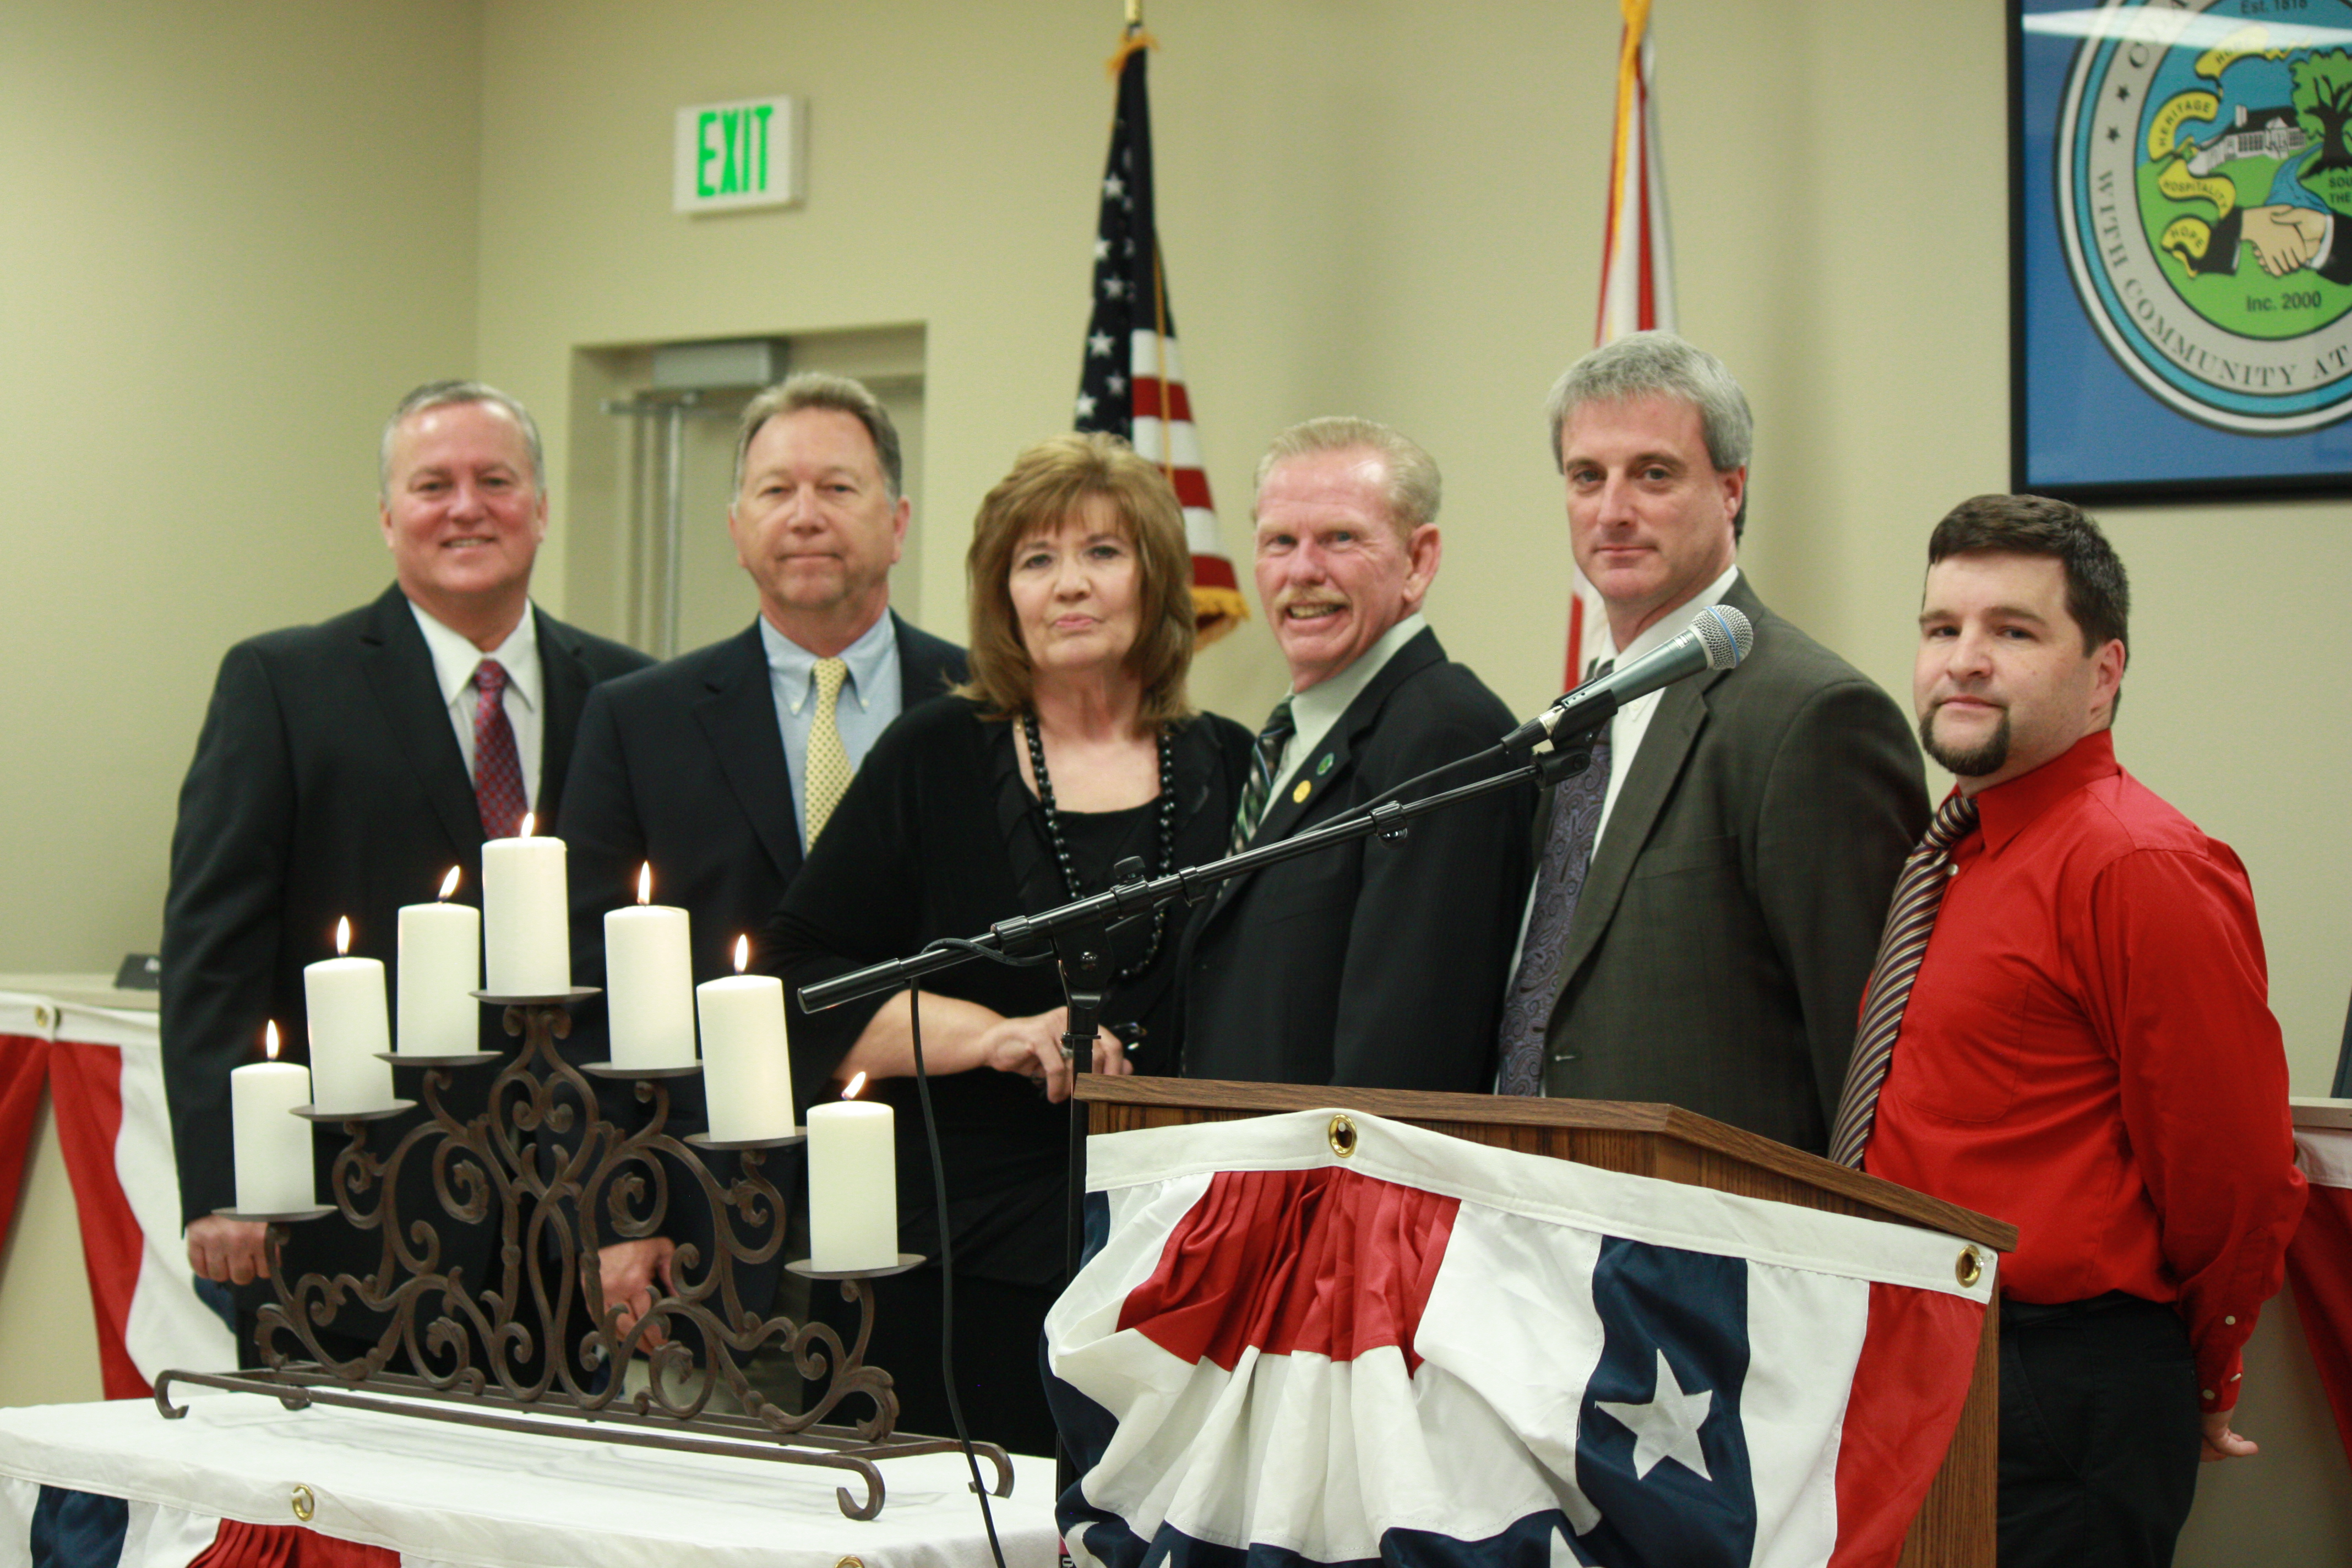 New Clay Council sworn into office